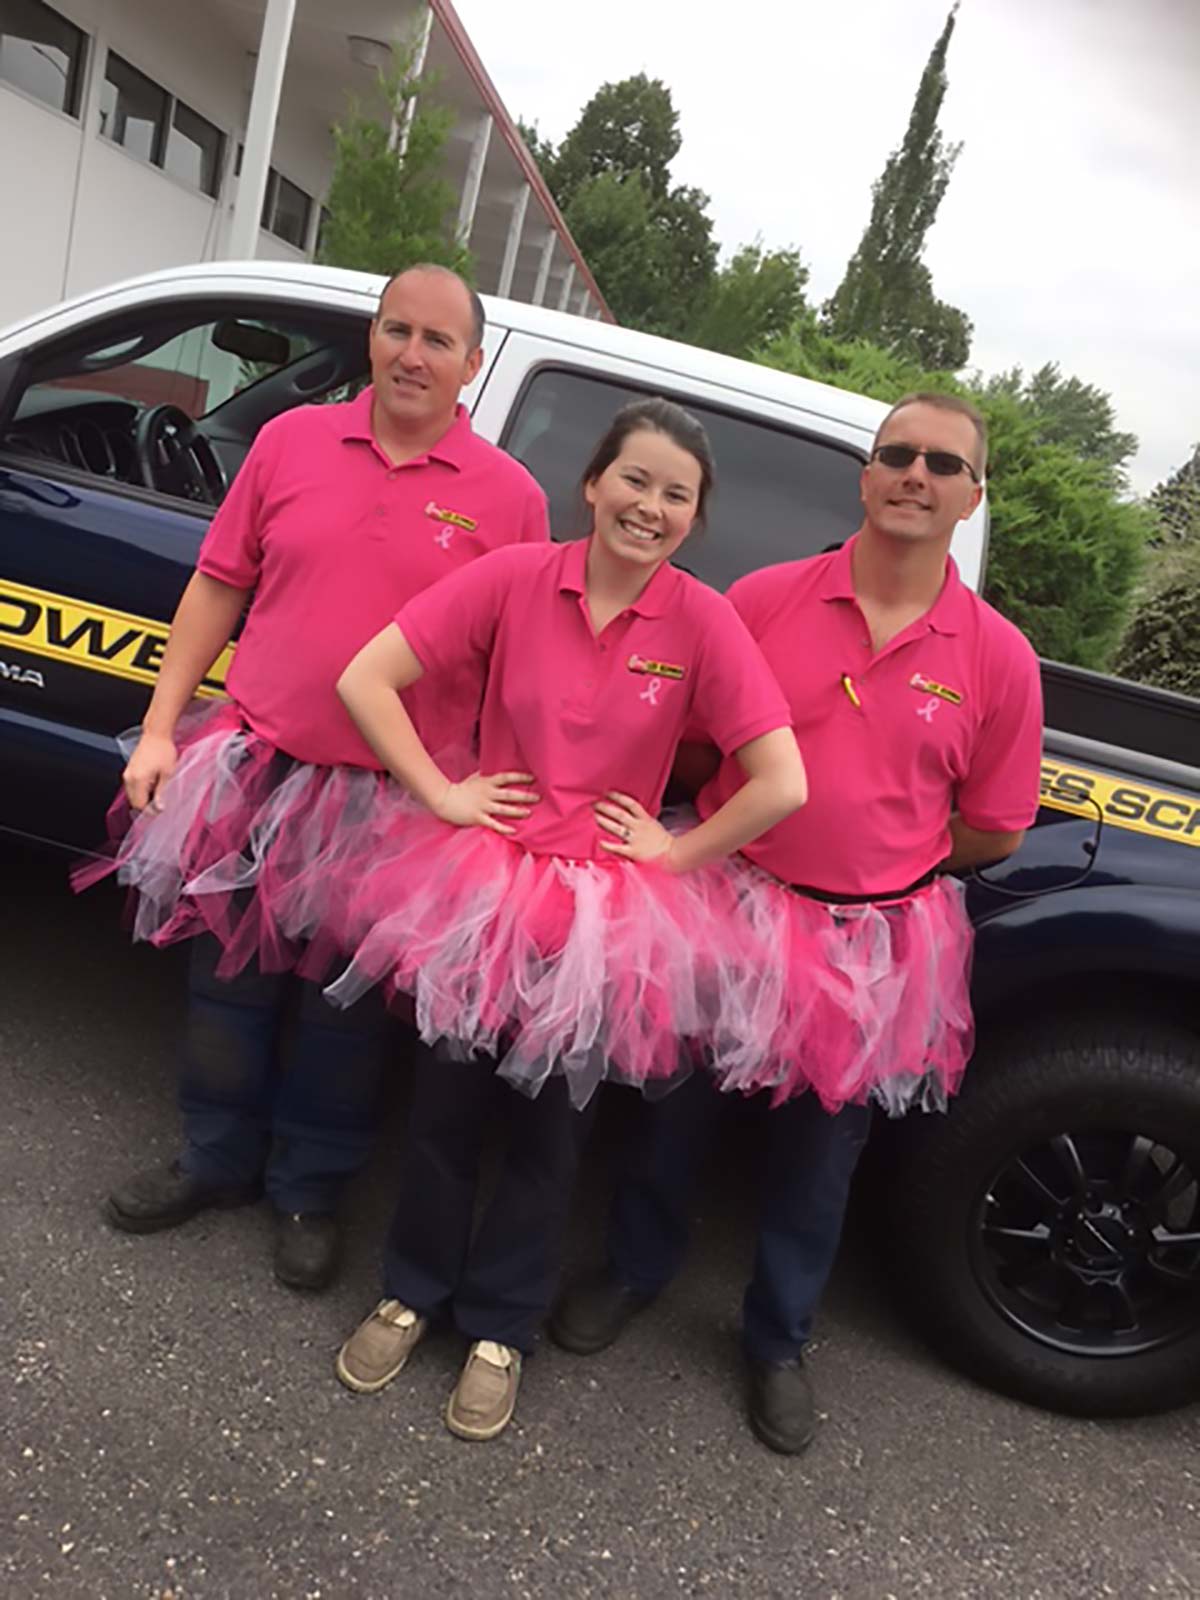 Les Schwab employees support the cause with pink tutus